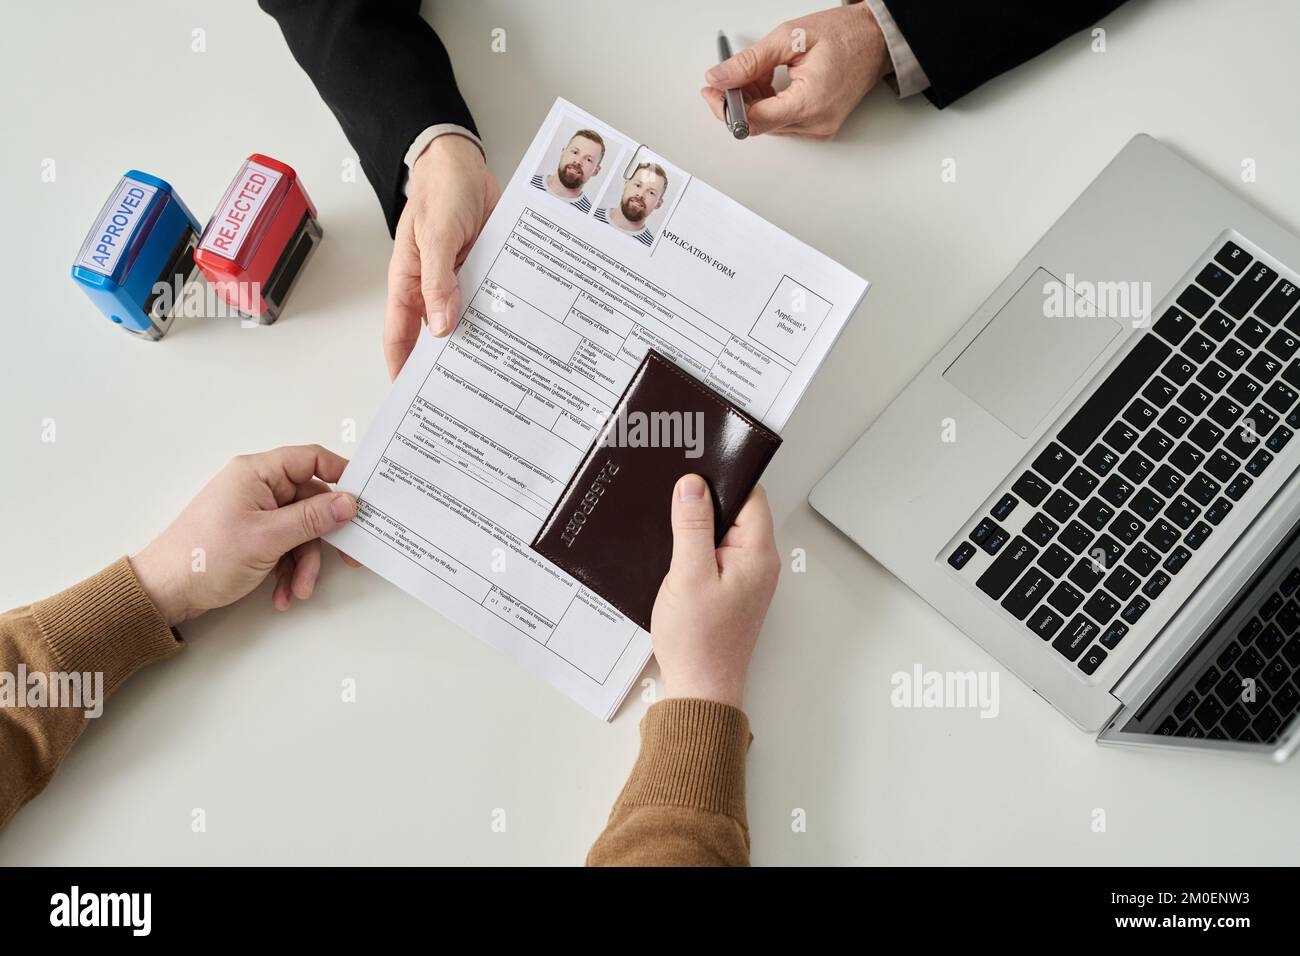 Top view of unrecognizable man applying for visa in immigration office and handing documents to worker Stock Photo